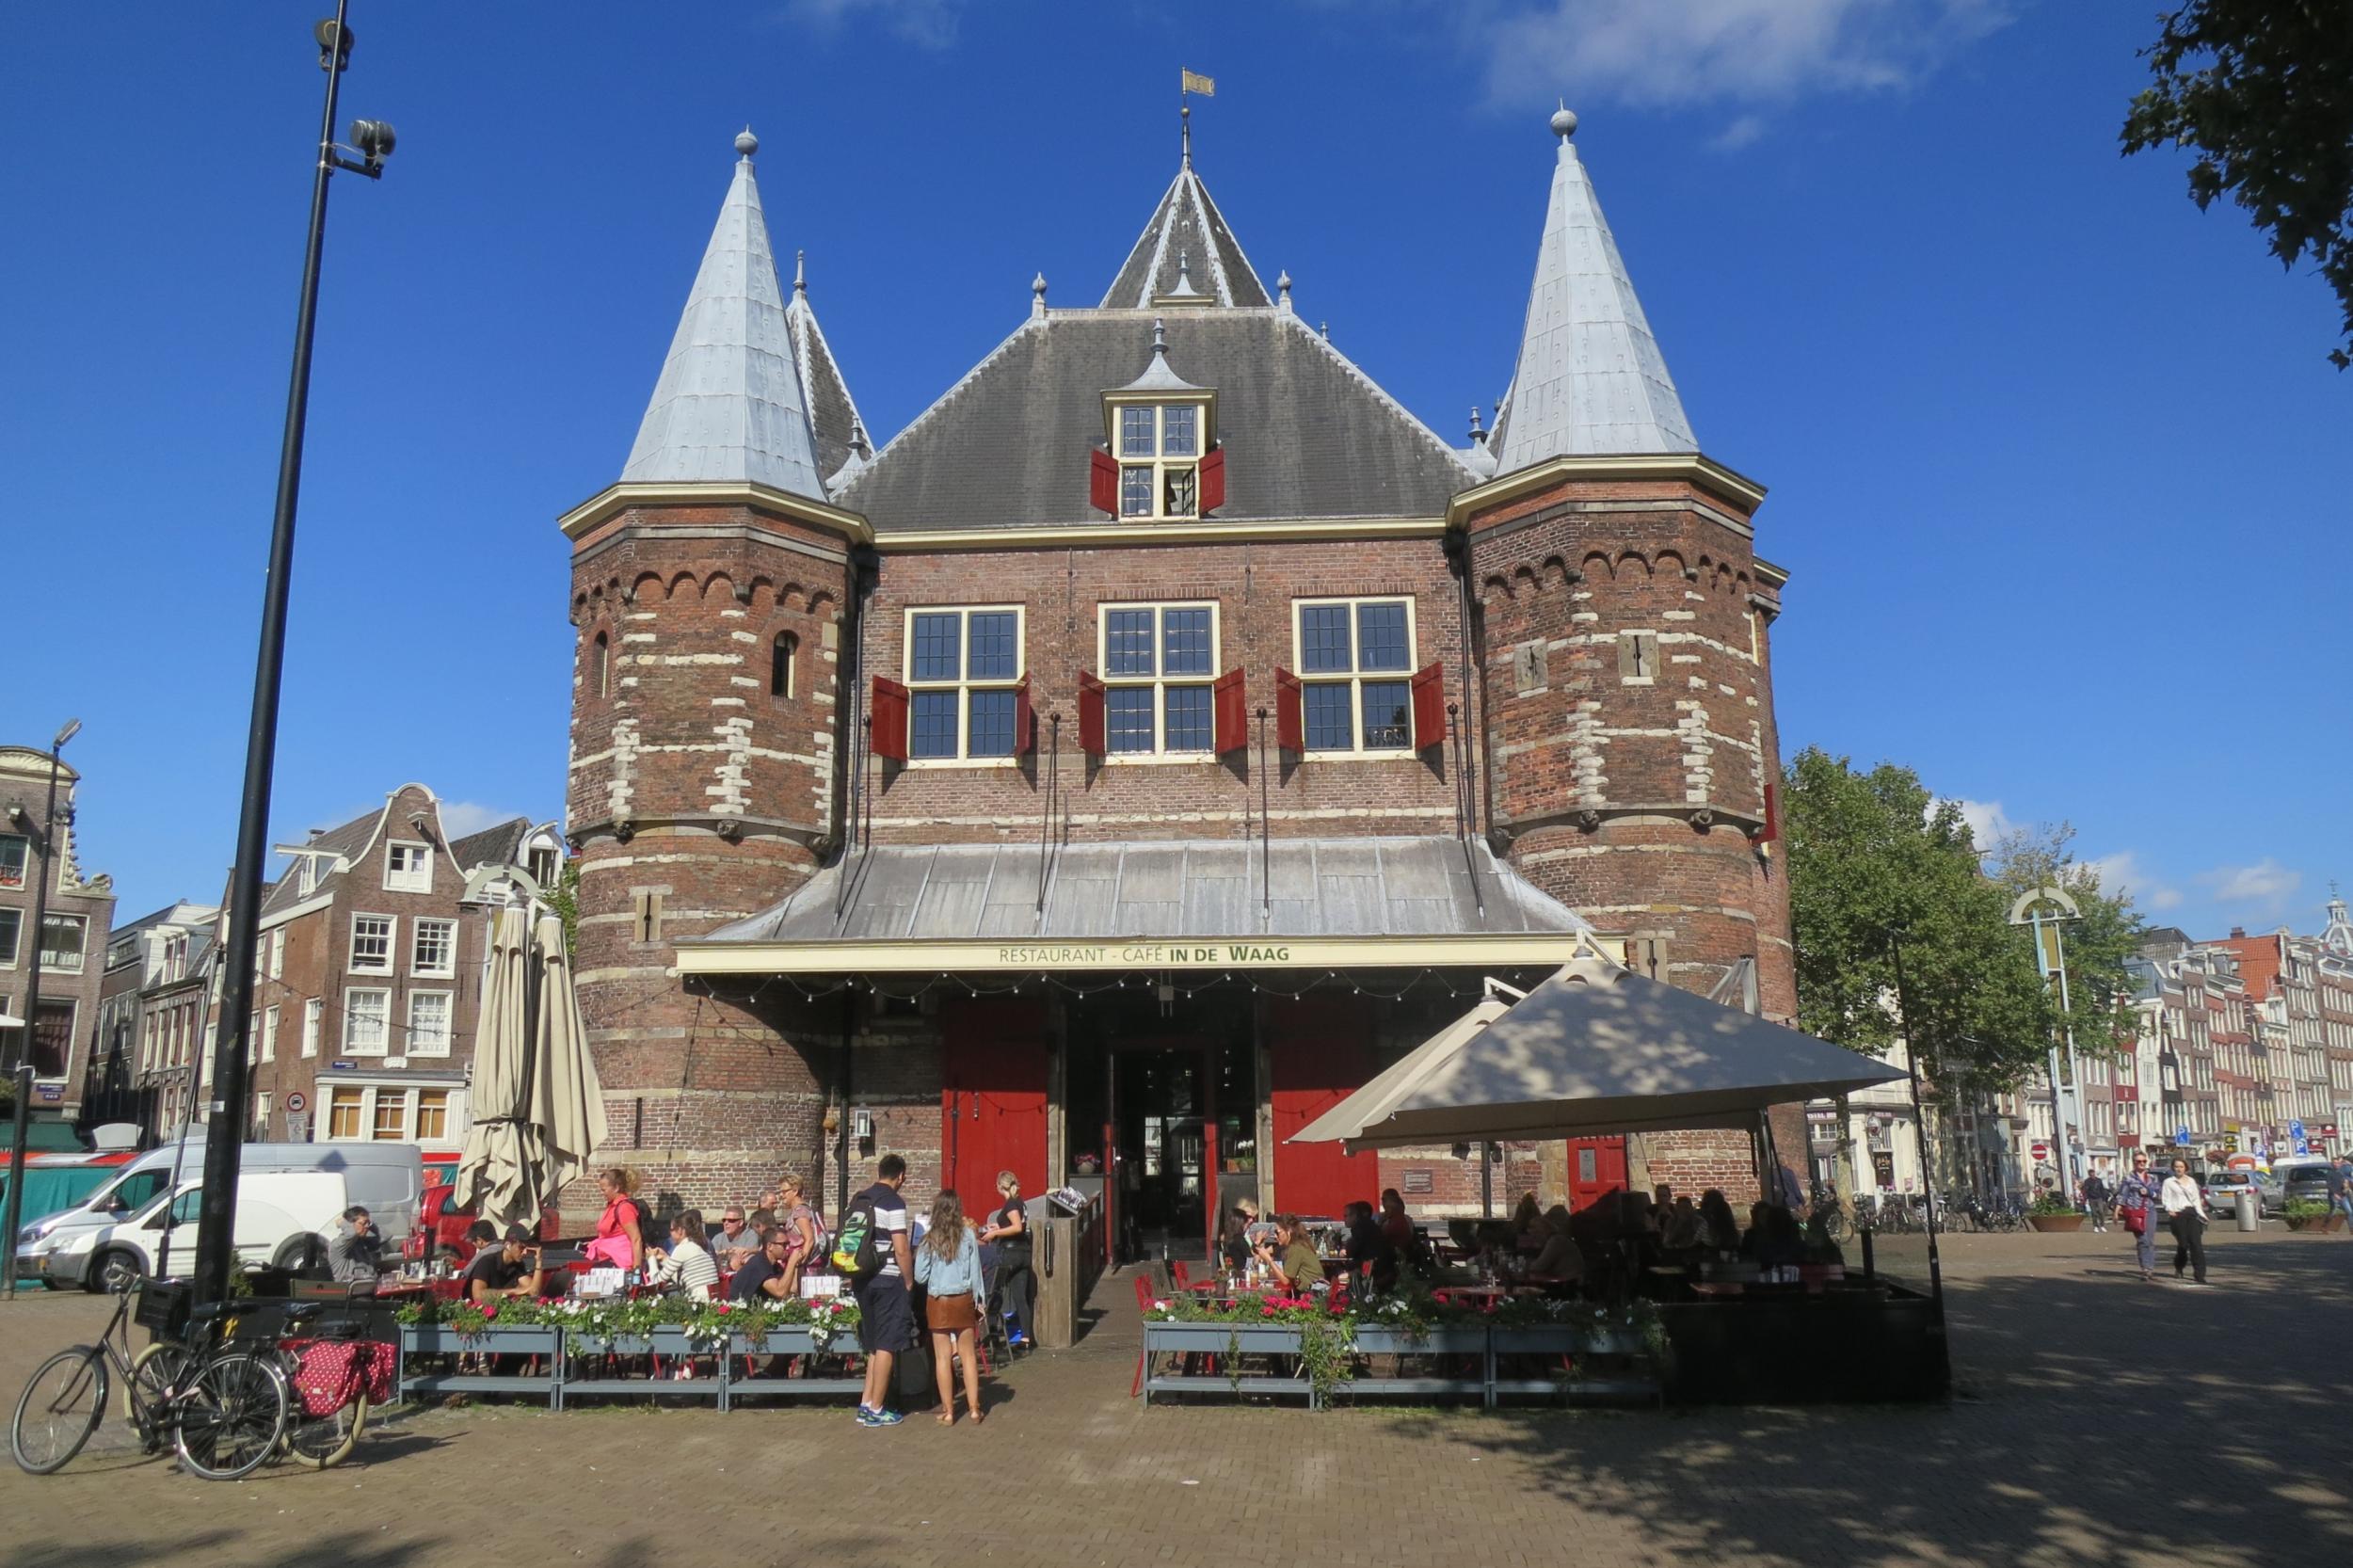 De Waag (the weighing house) was originally part of the old city walls